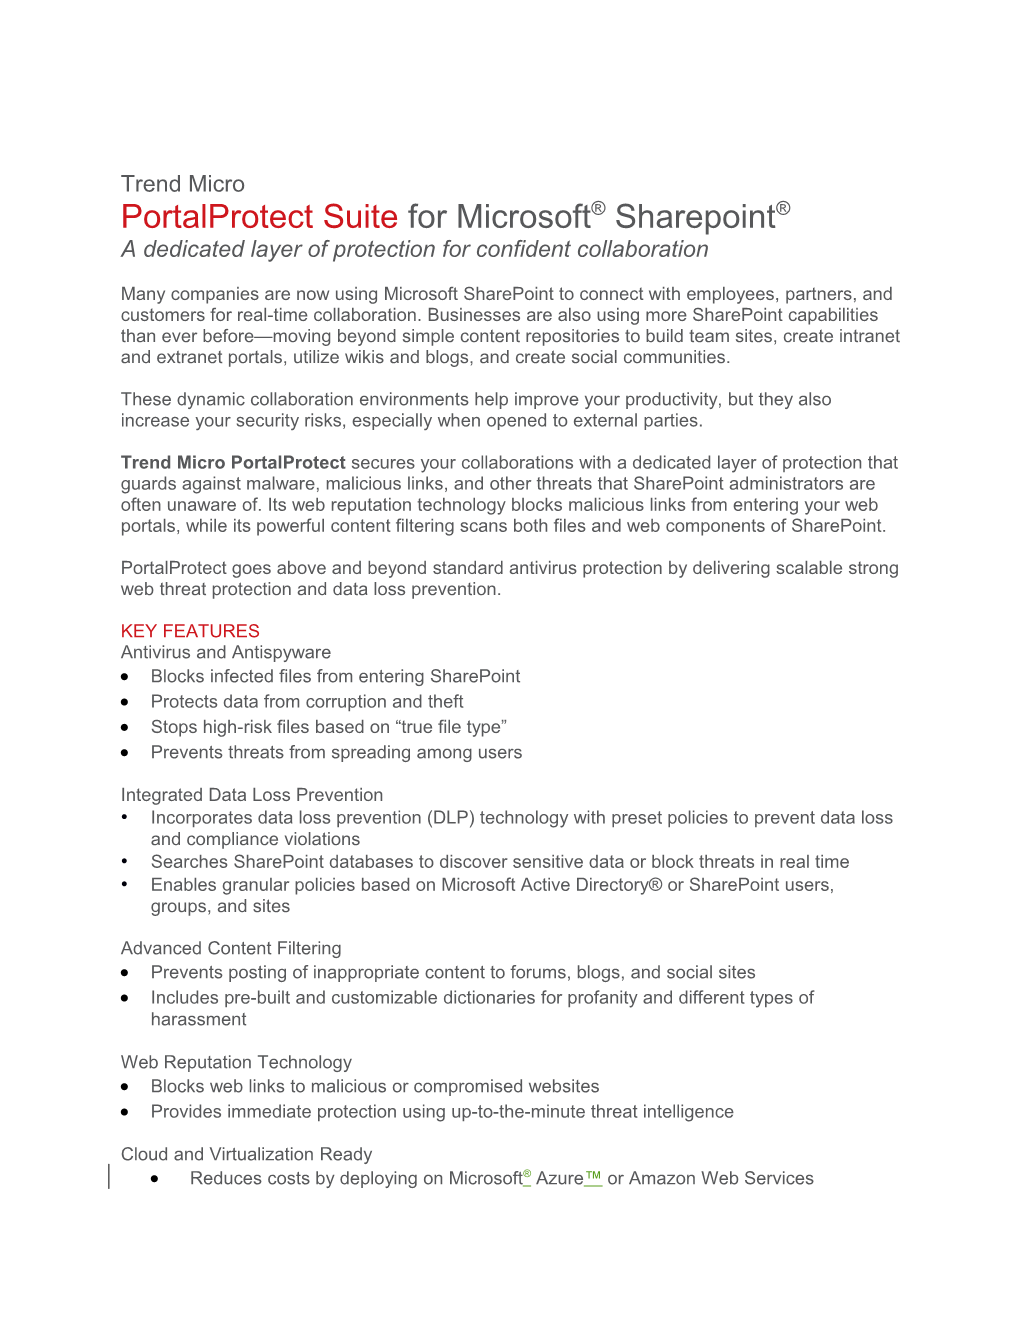 Portalprotect Suite for Microsoft Sharepoint